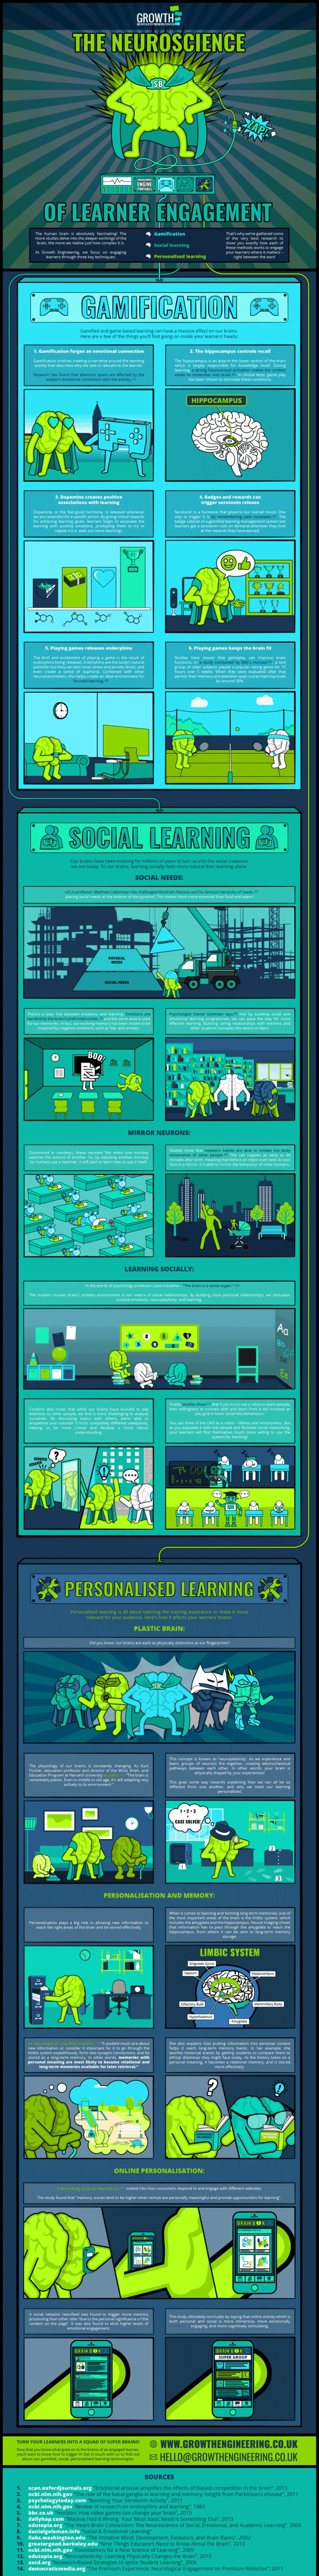 The Neuroscience of Learner Engagement Infographic